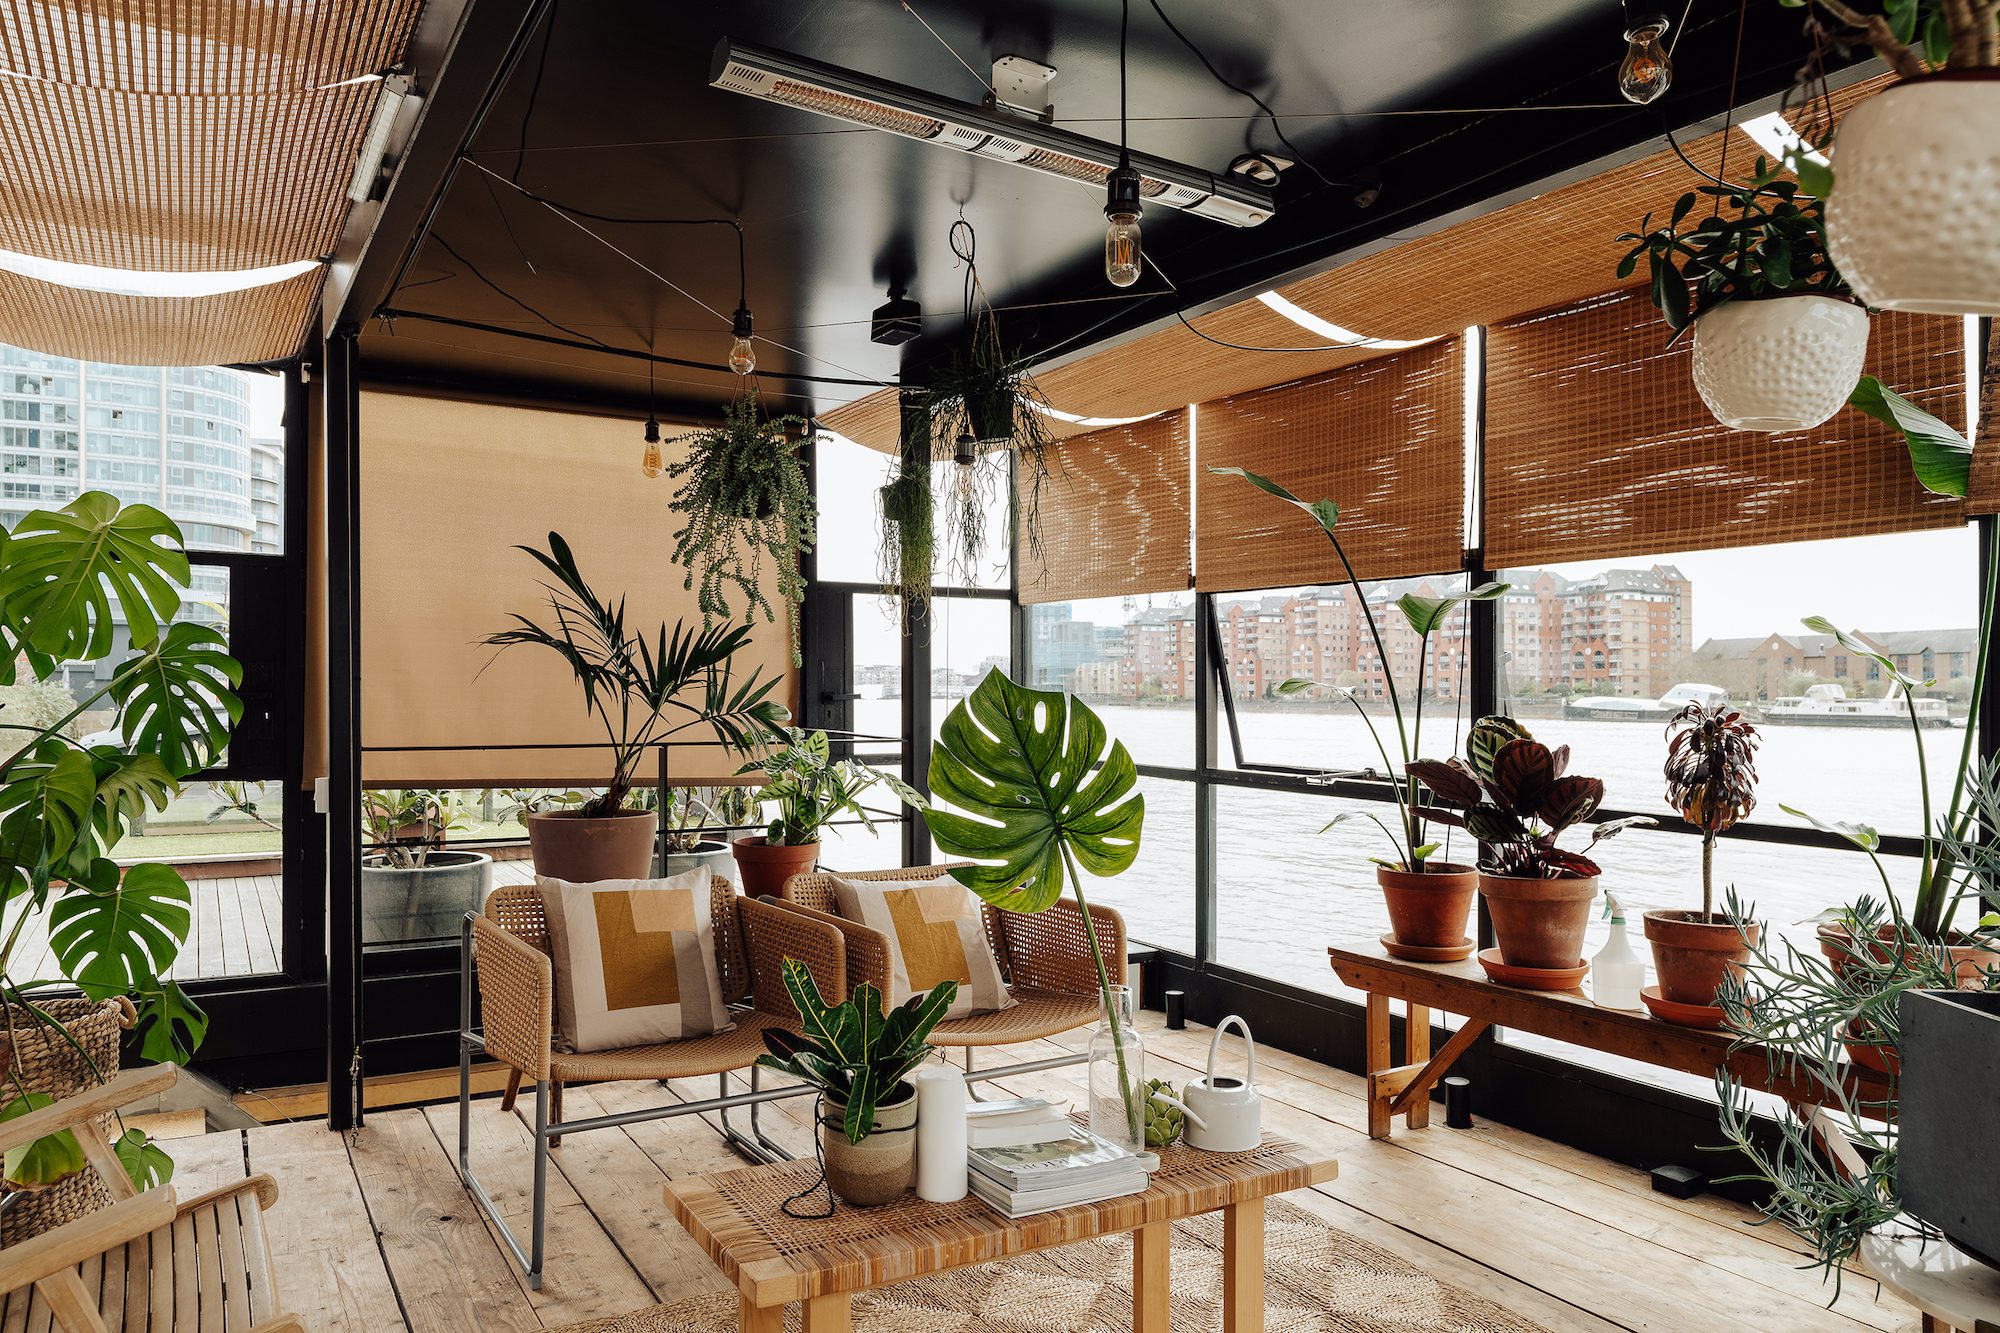 A River Runs Through It: A Family's Barge-Turned-Houseboat on the Thames - Remodelista